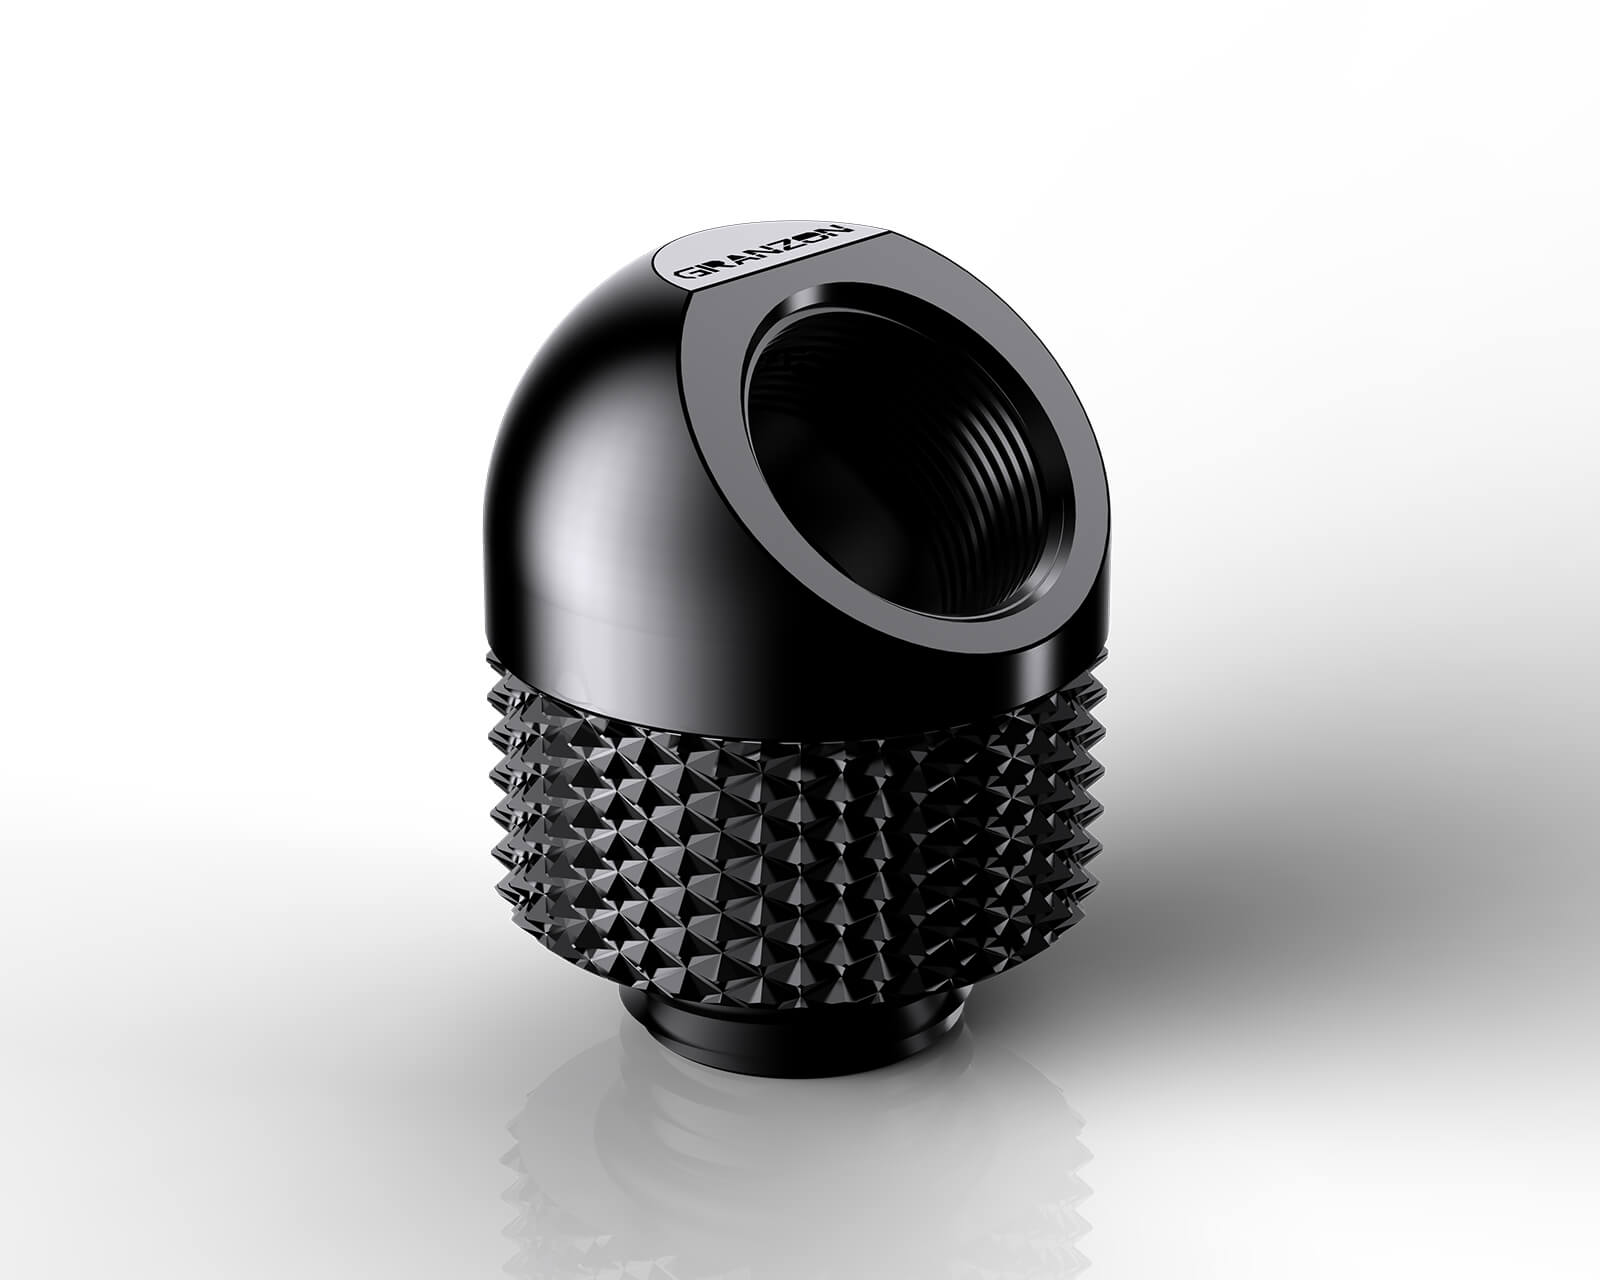 Granzon G 1/4in. Male to Female 45 Degree Rotary Elbow Fitting (GD-45) - PrimoChill - KEEPING IT COOL Black